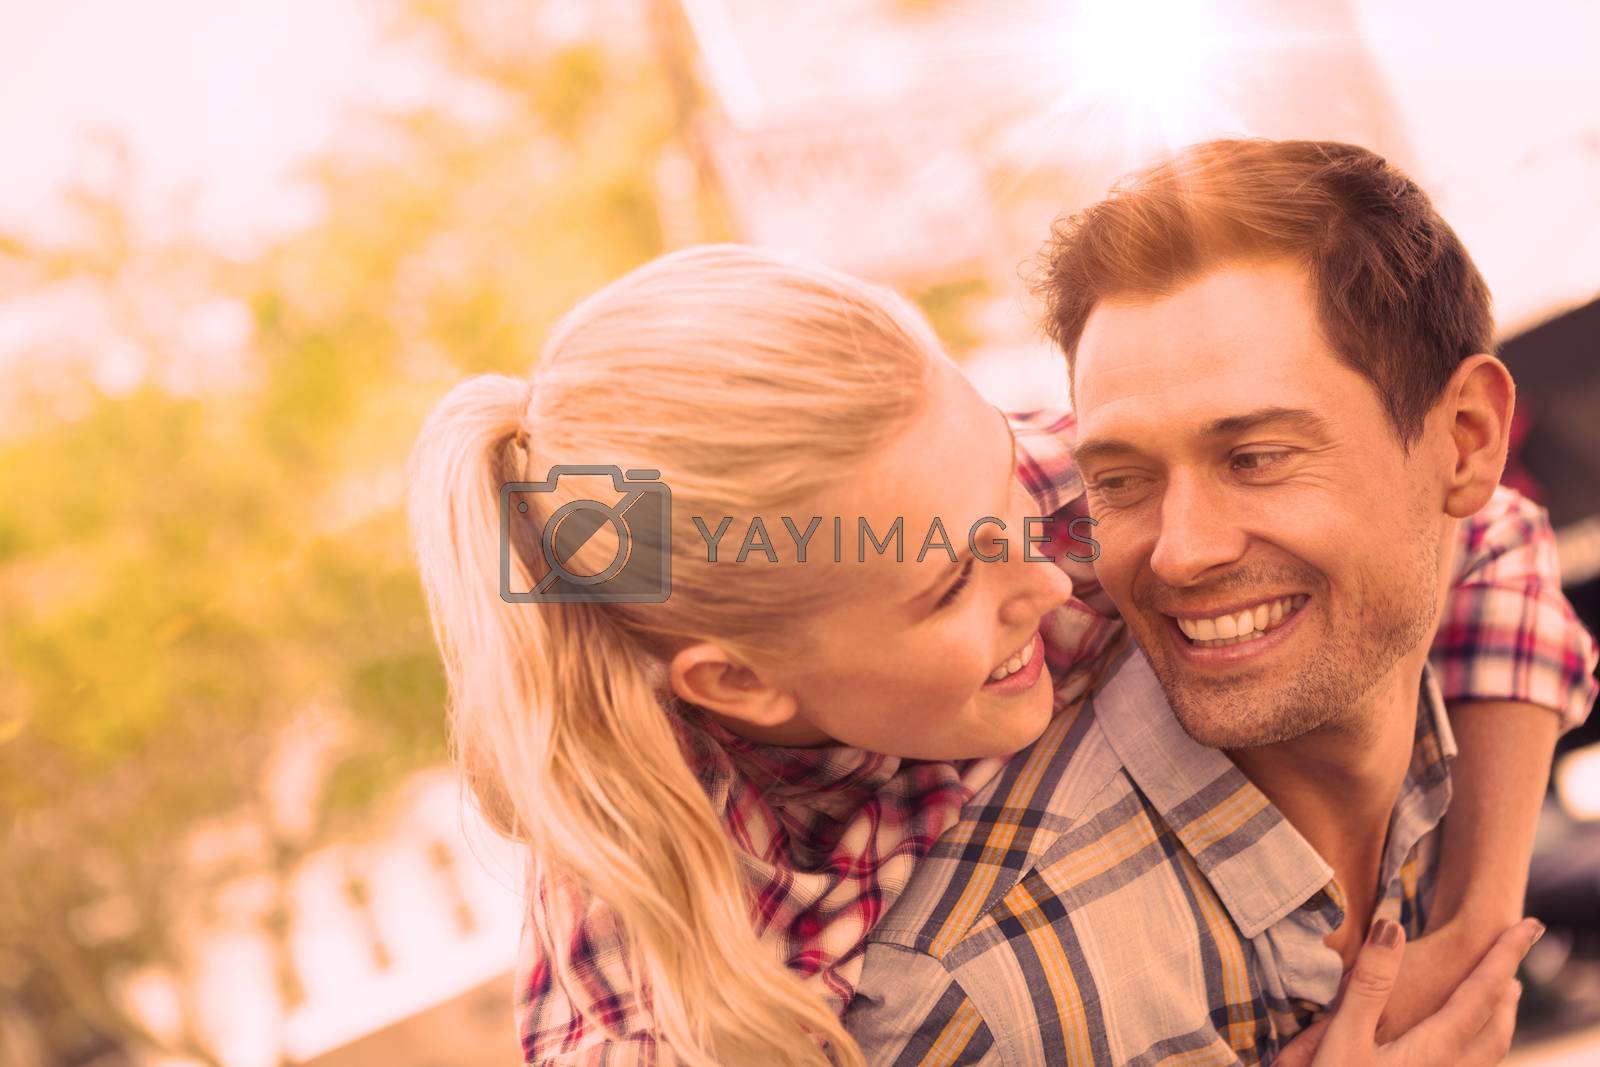 Royalty free image of Man giving his pretty girlfriend a piggy back by Wavebreakmedia